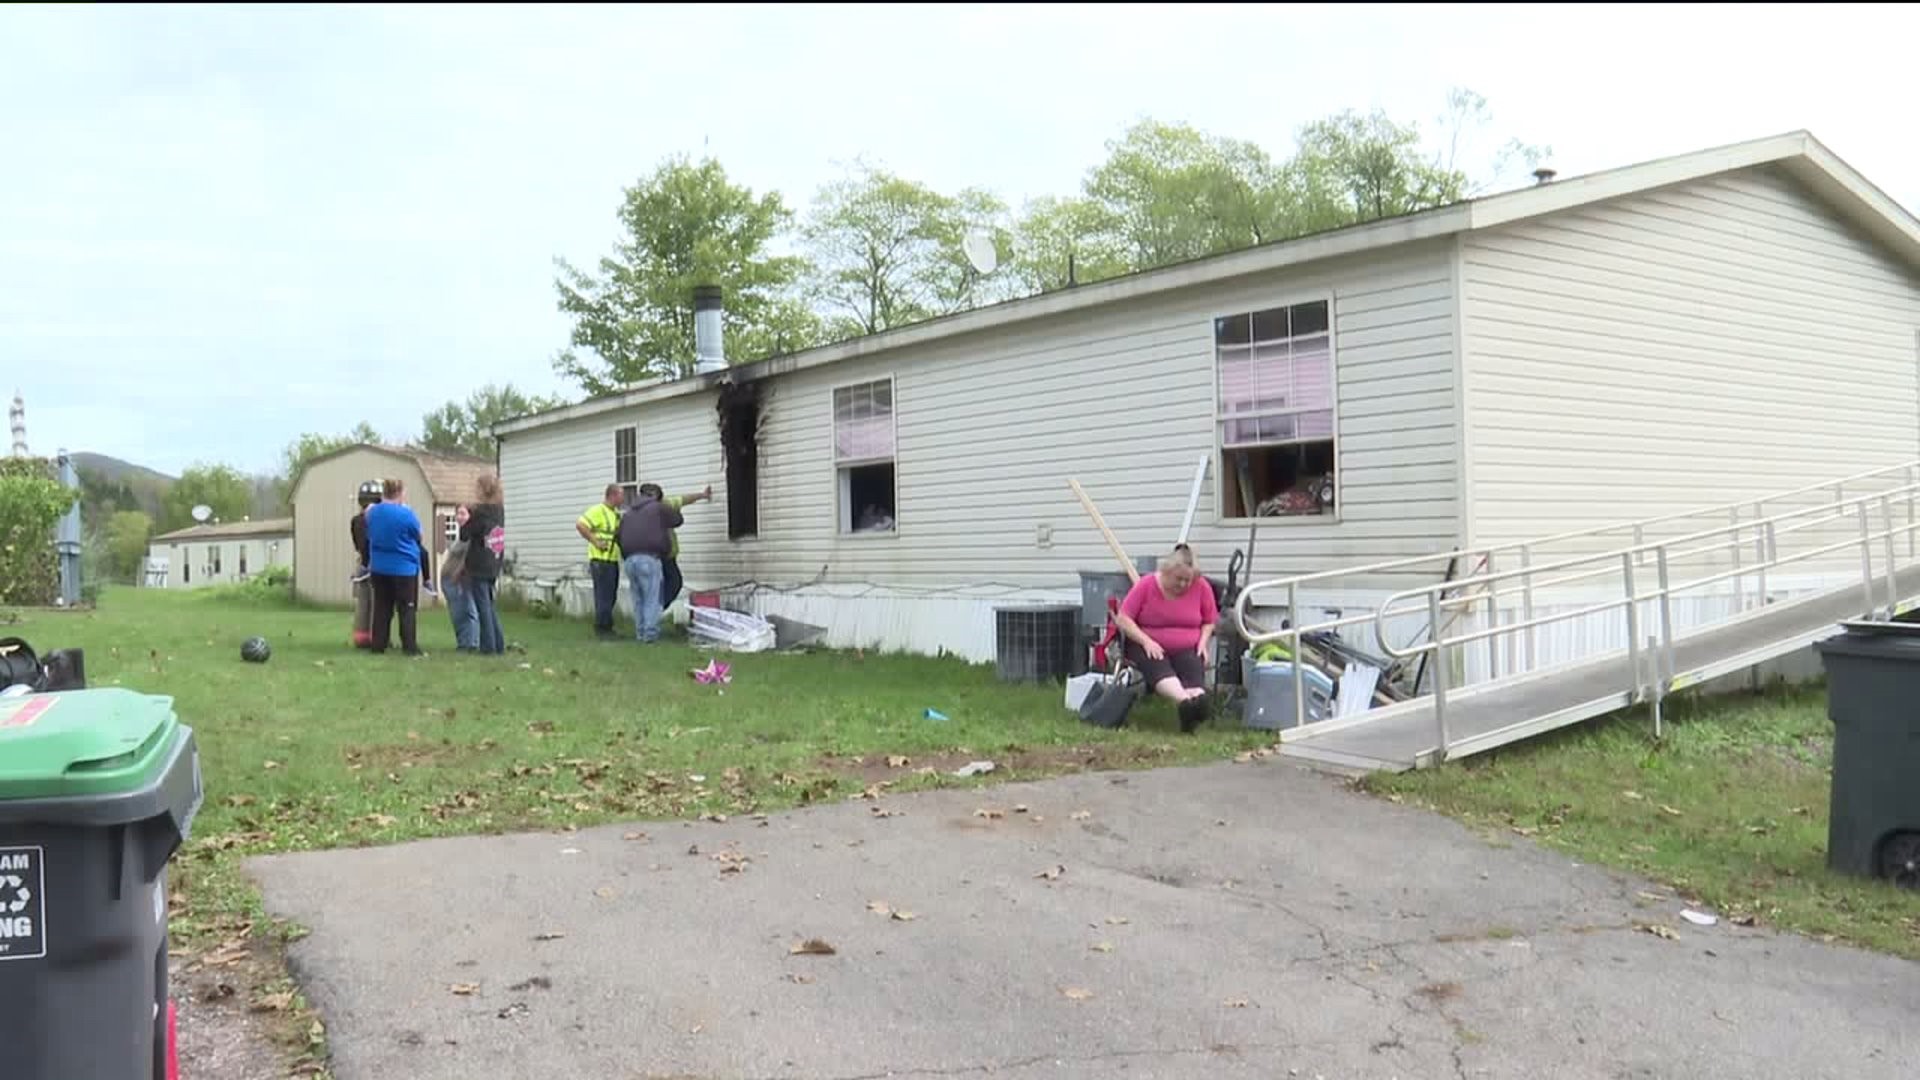 Home in Schuylkill County Damaged by Fire